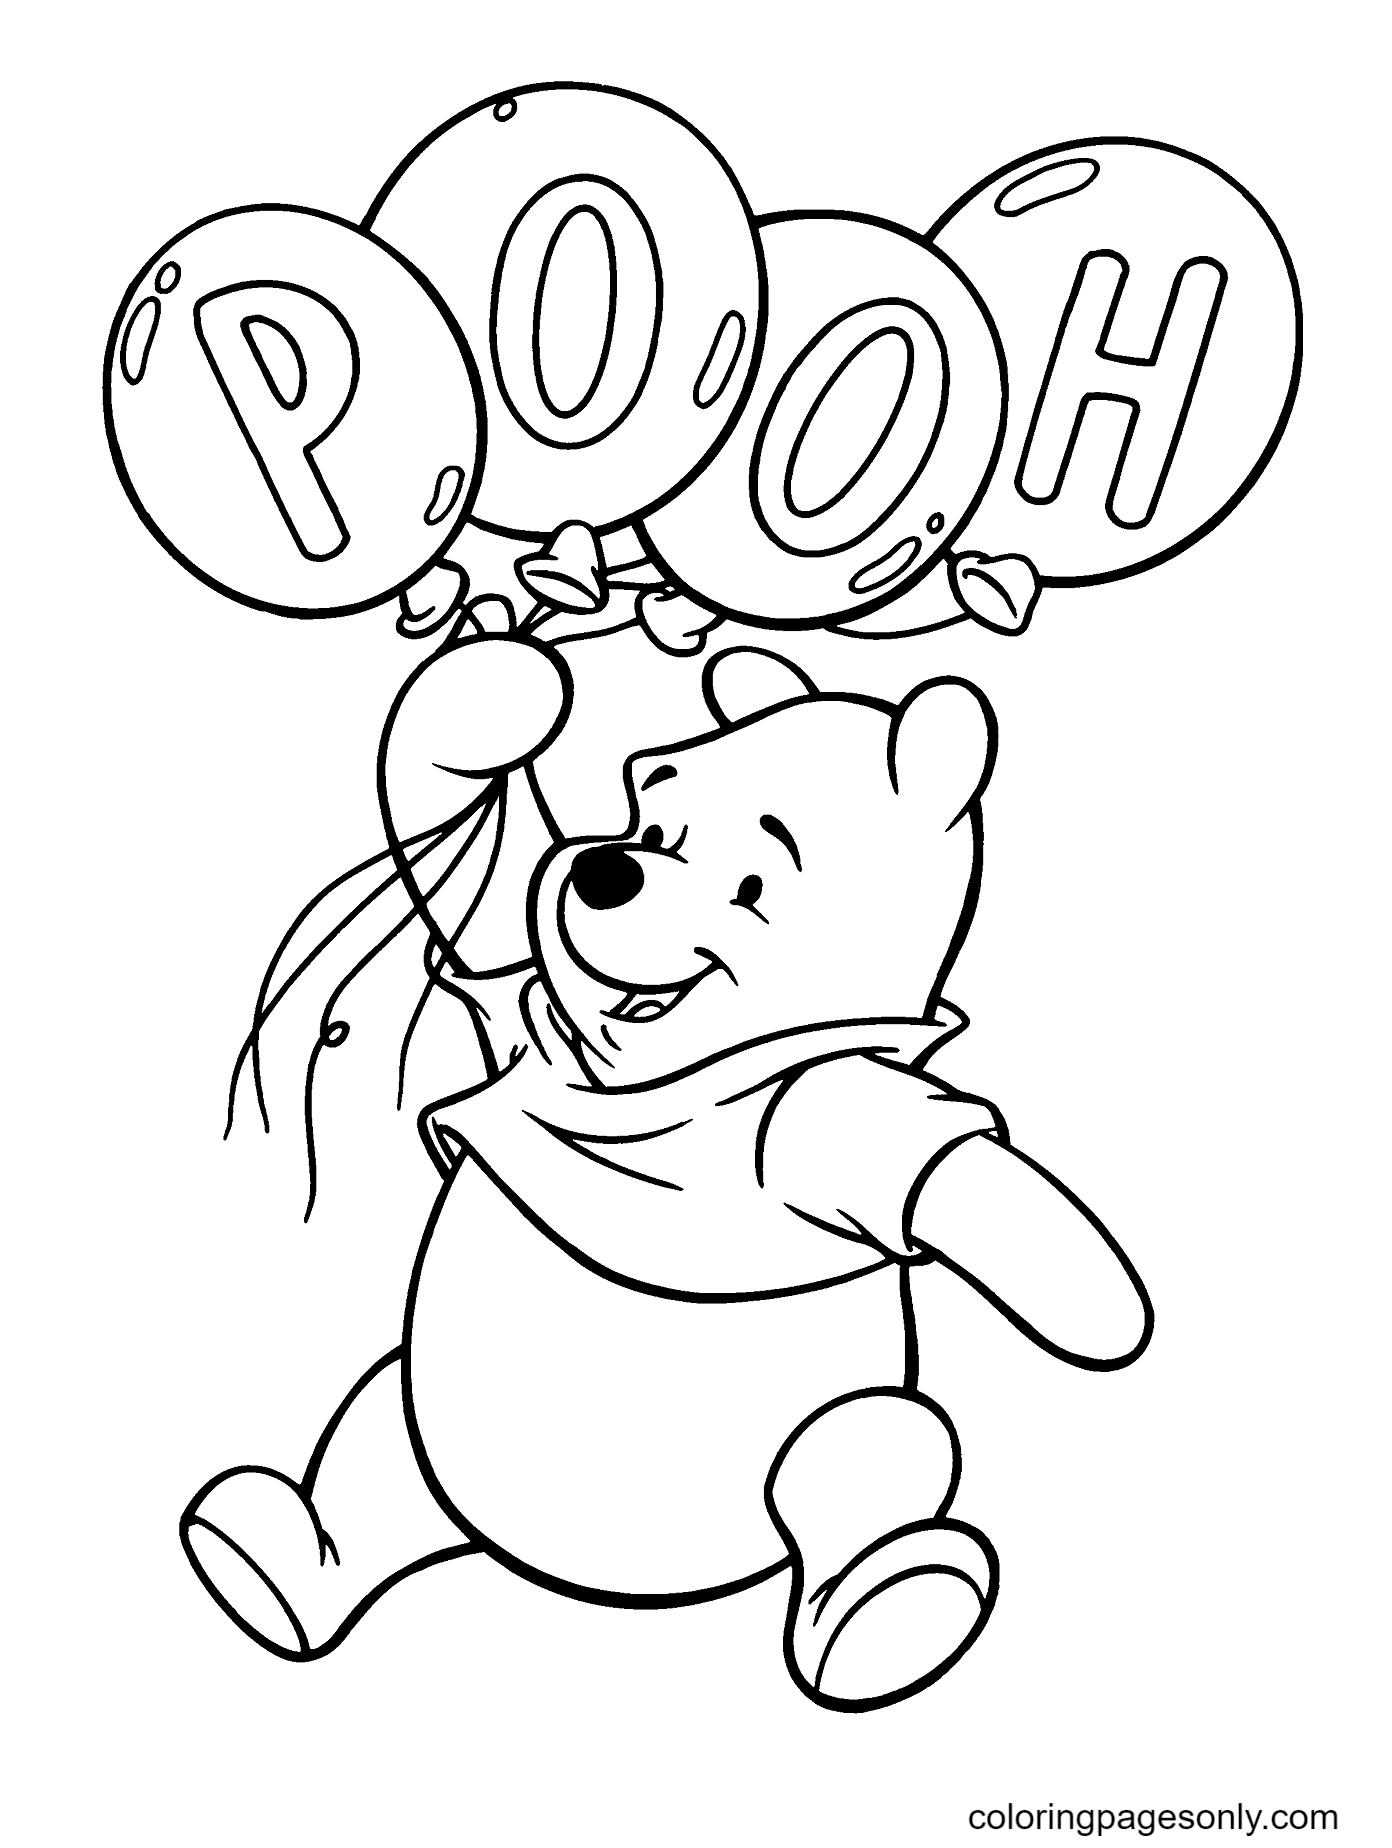 Pooh Bear with Balloons Coloring Page